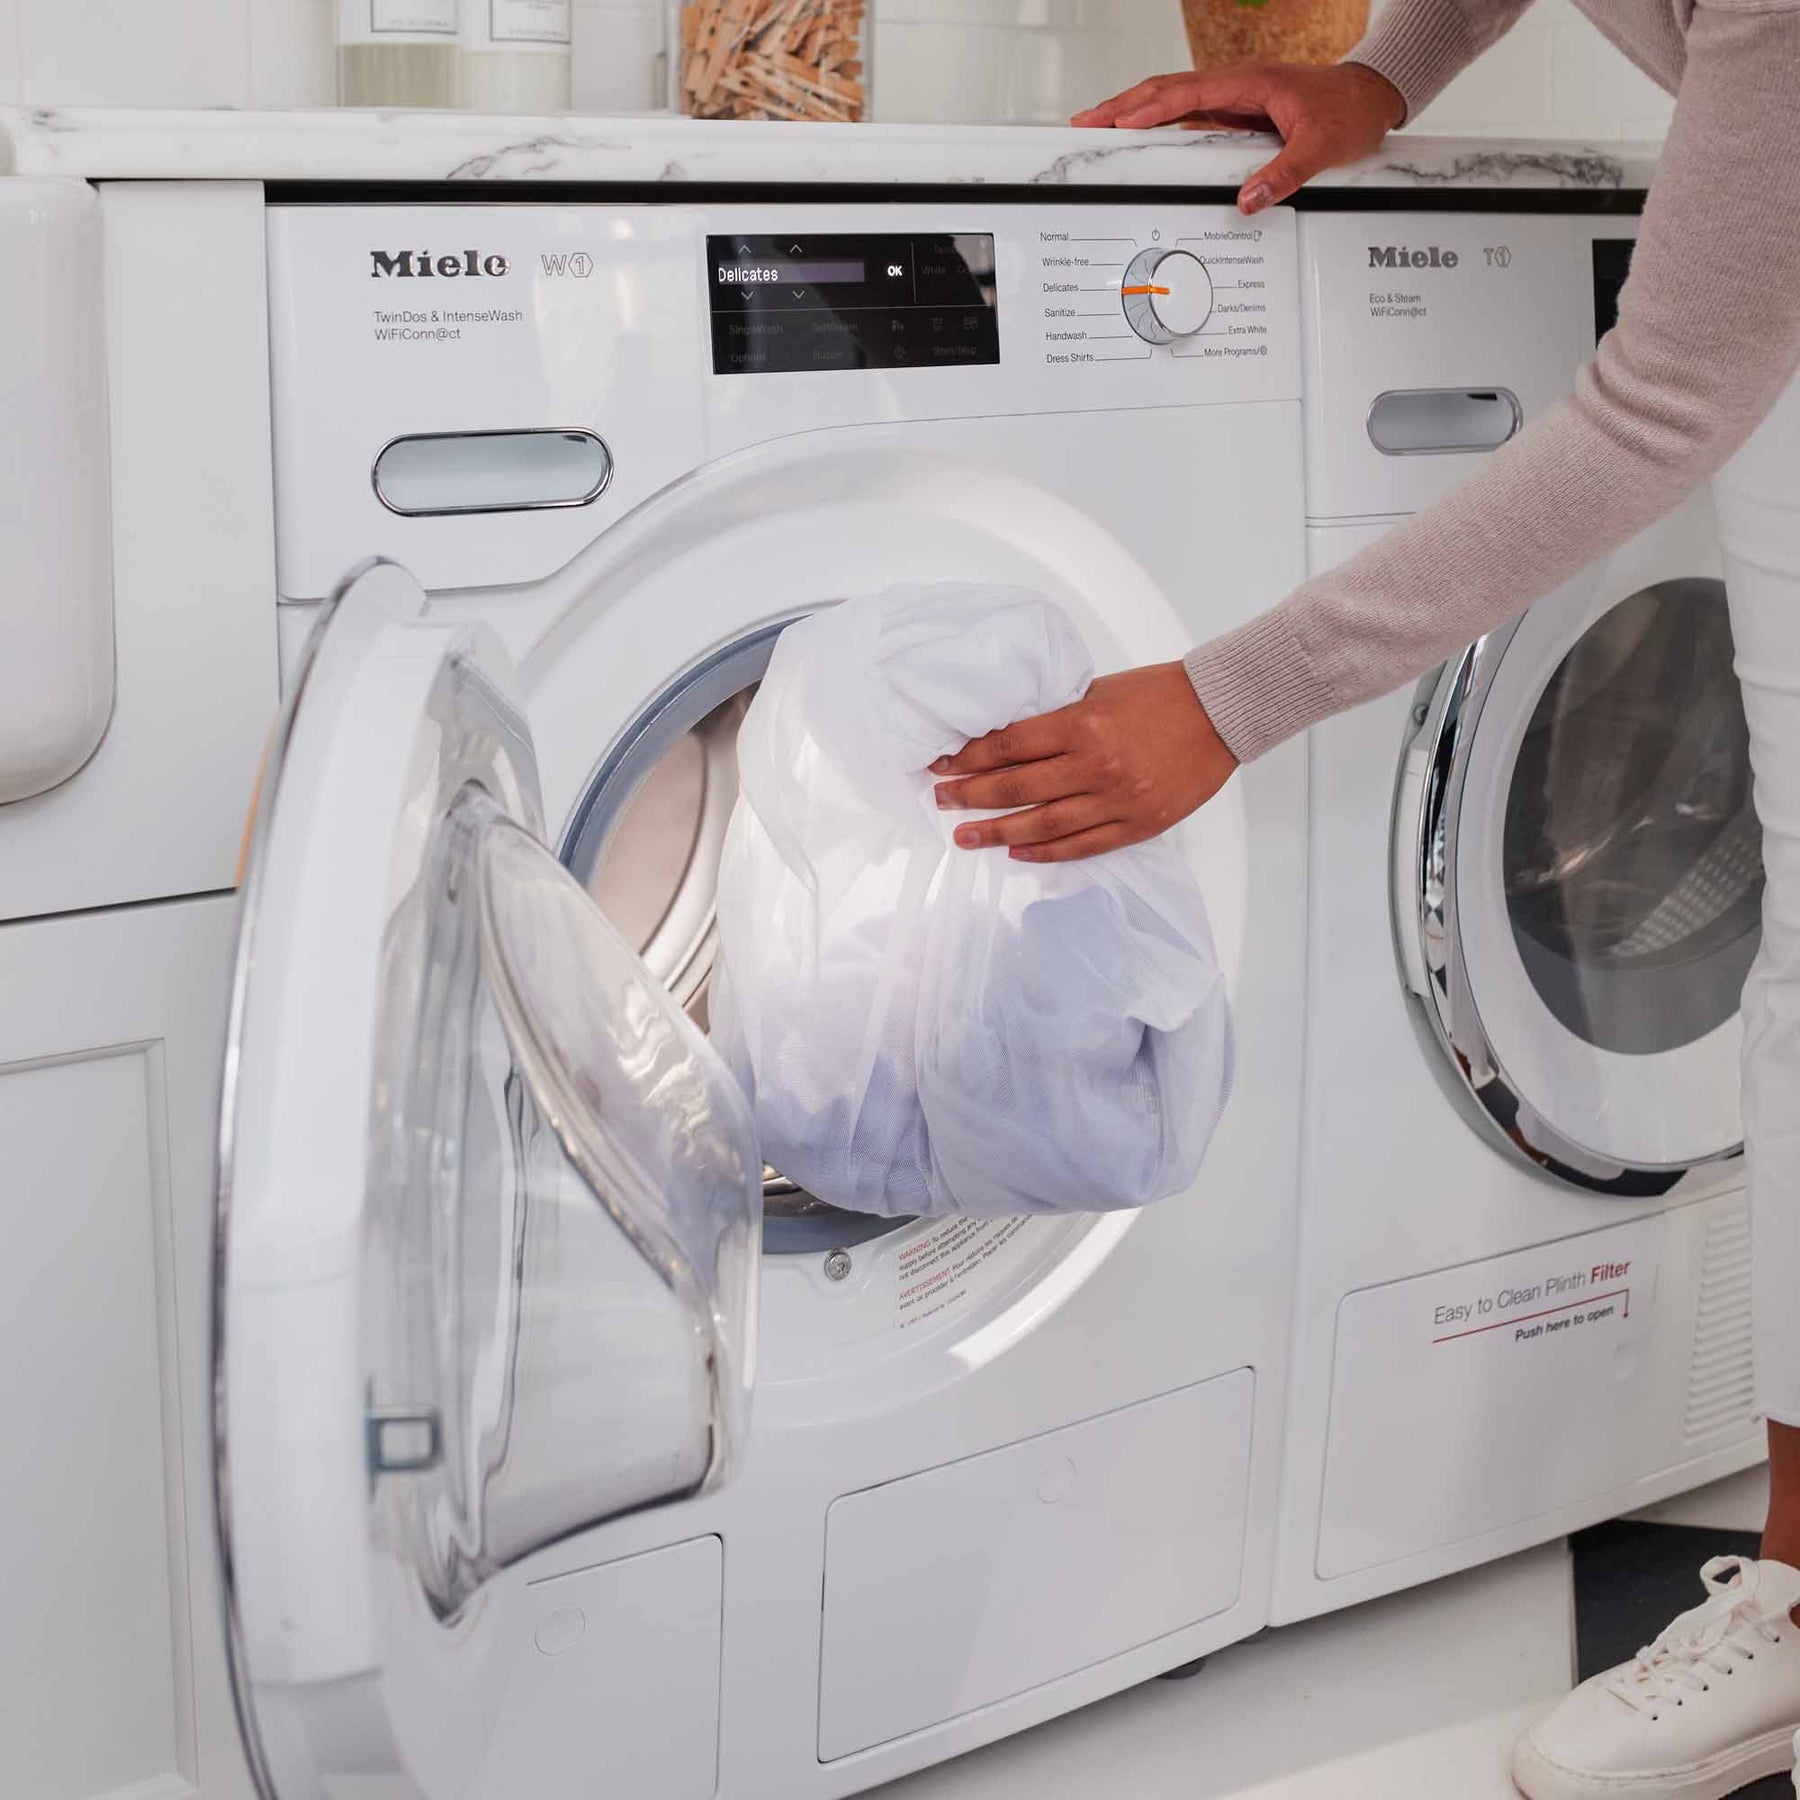 How to stop my clothes from getting holes from the washing machine - Quora